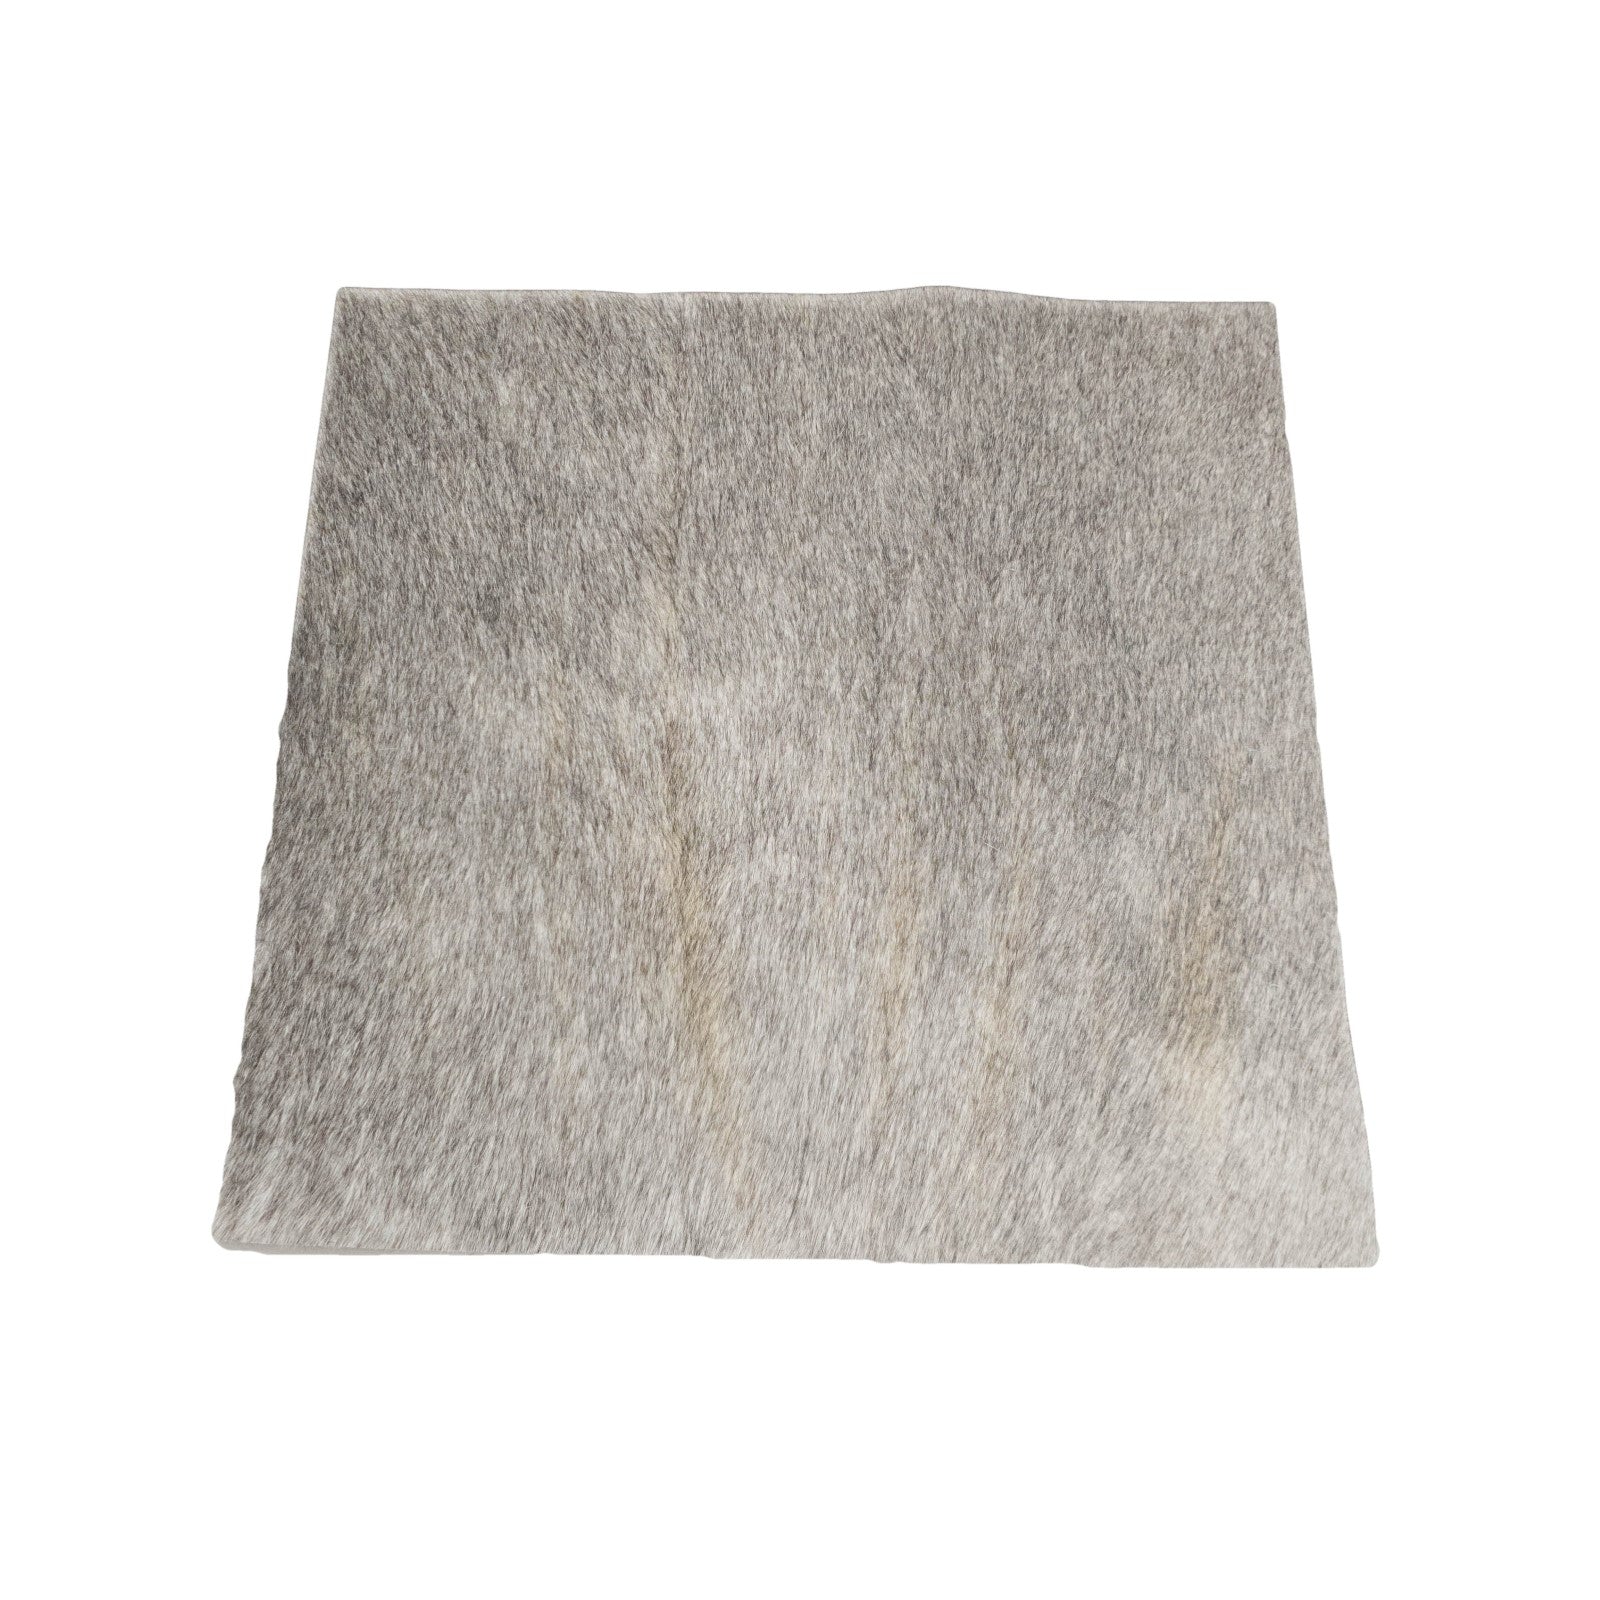 Peppered Light to Medium Grey Hair on Cow Hide Pre-cut,  | The Leather Guy